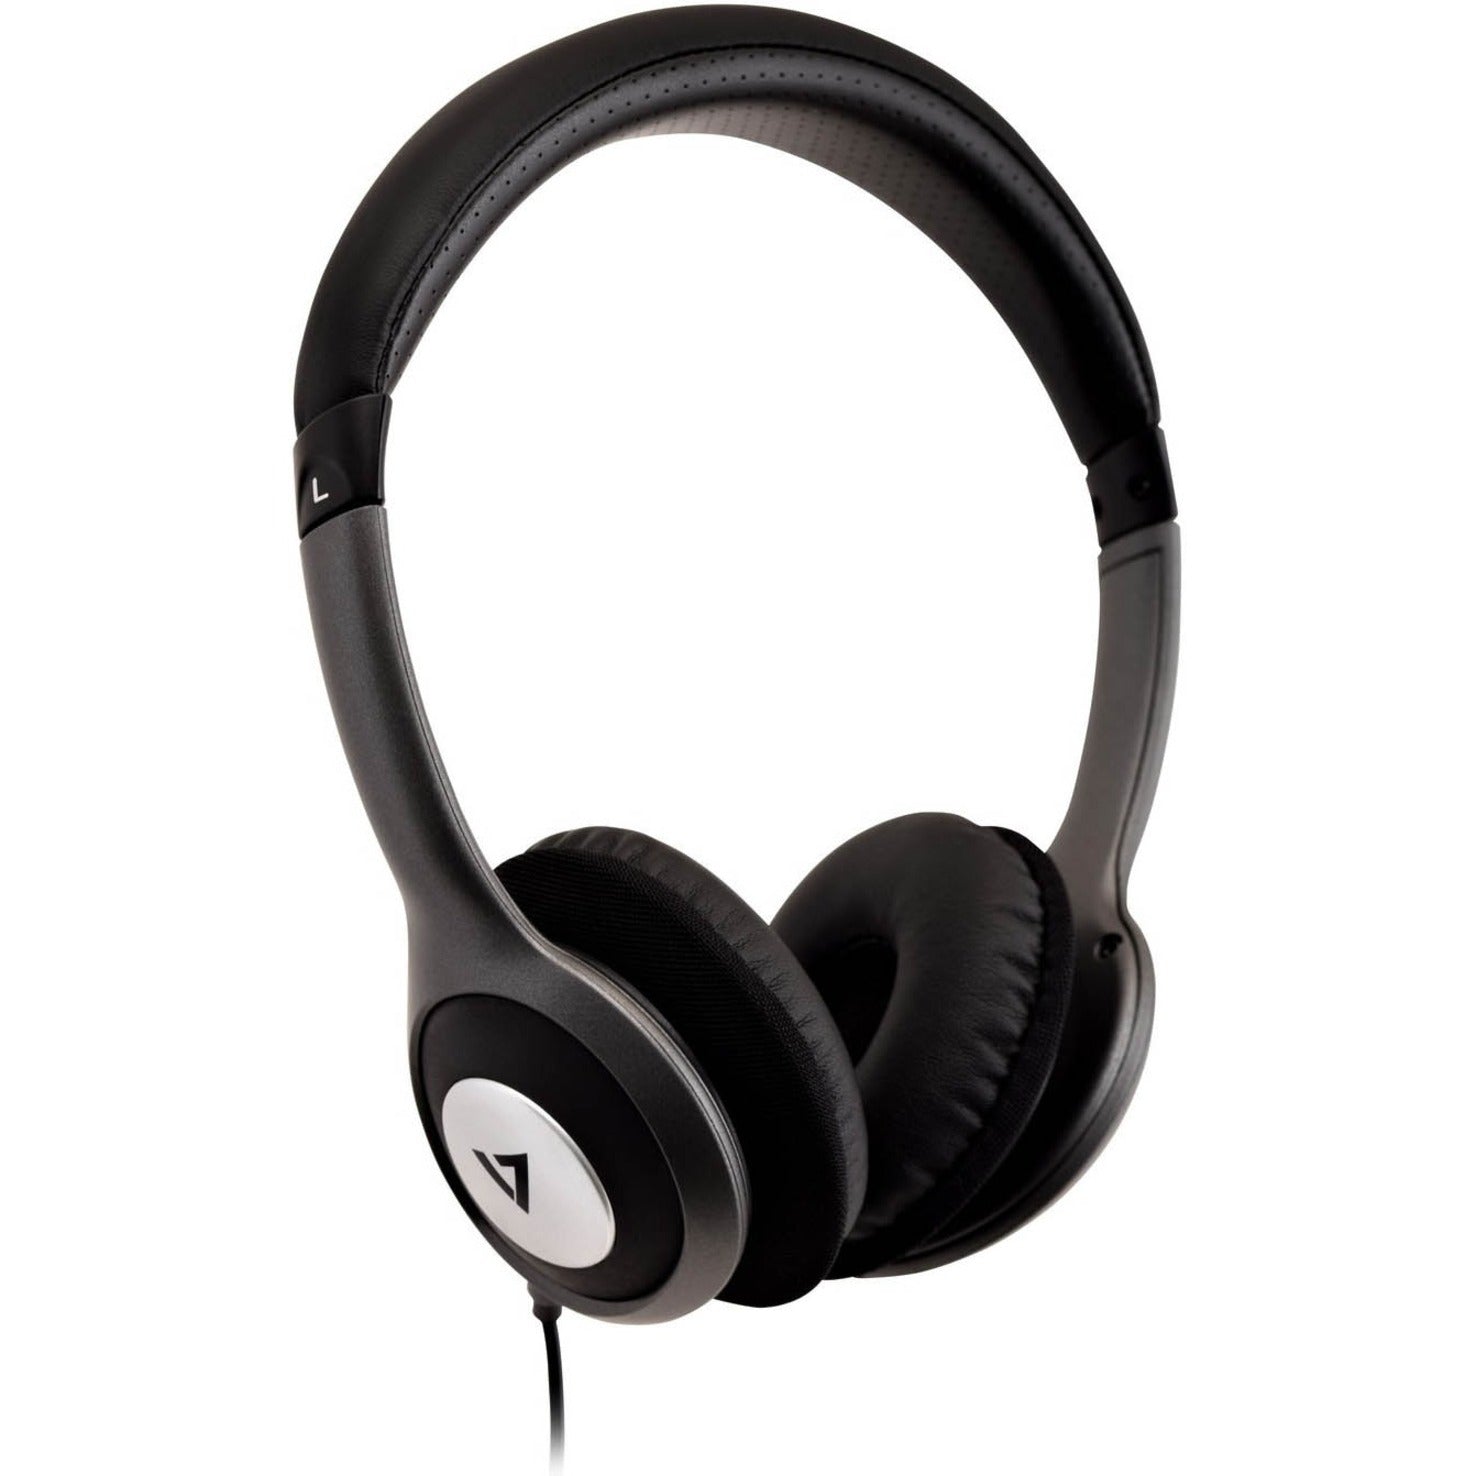 V7 HA520-2NP Deluxe Stereo Headphones with Volume Control, Over-the-head, 2 Year Warranty, Mini-phone (3.5mm) Interface